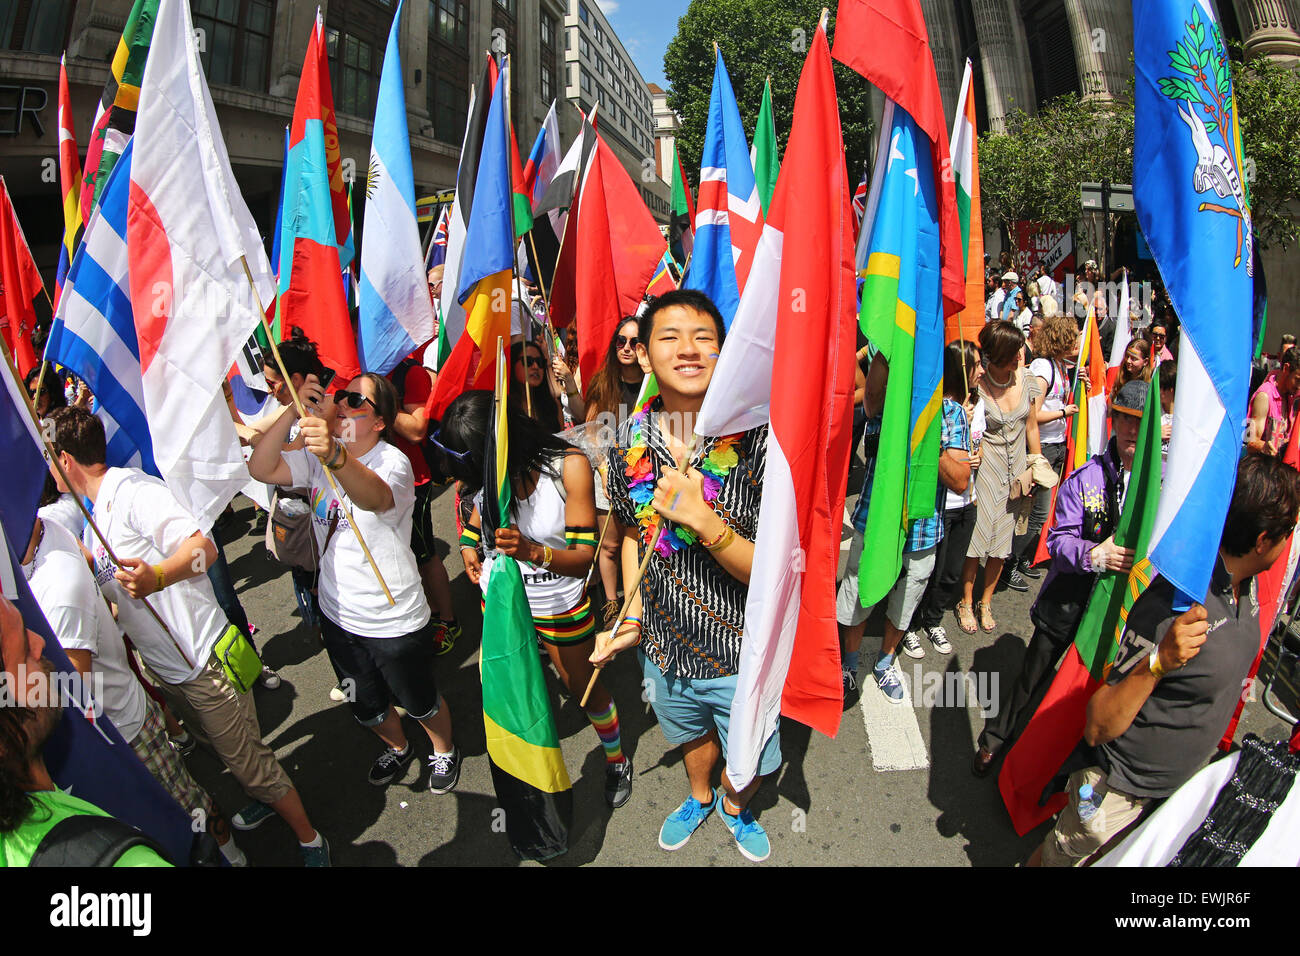 London, UK. 27th June 2015. Participants with flags of all nations at the London Pride Parade 2015 Credit:  Paul Brown/Alamy Live News Stock Photo